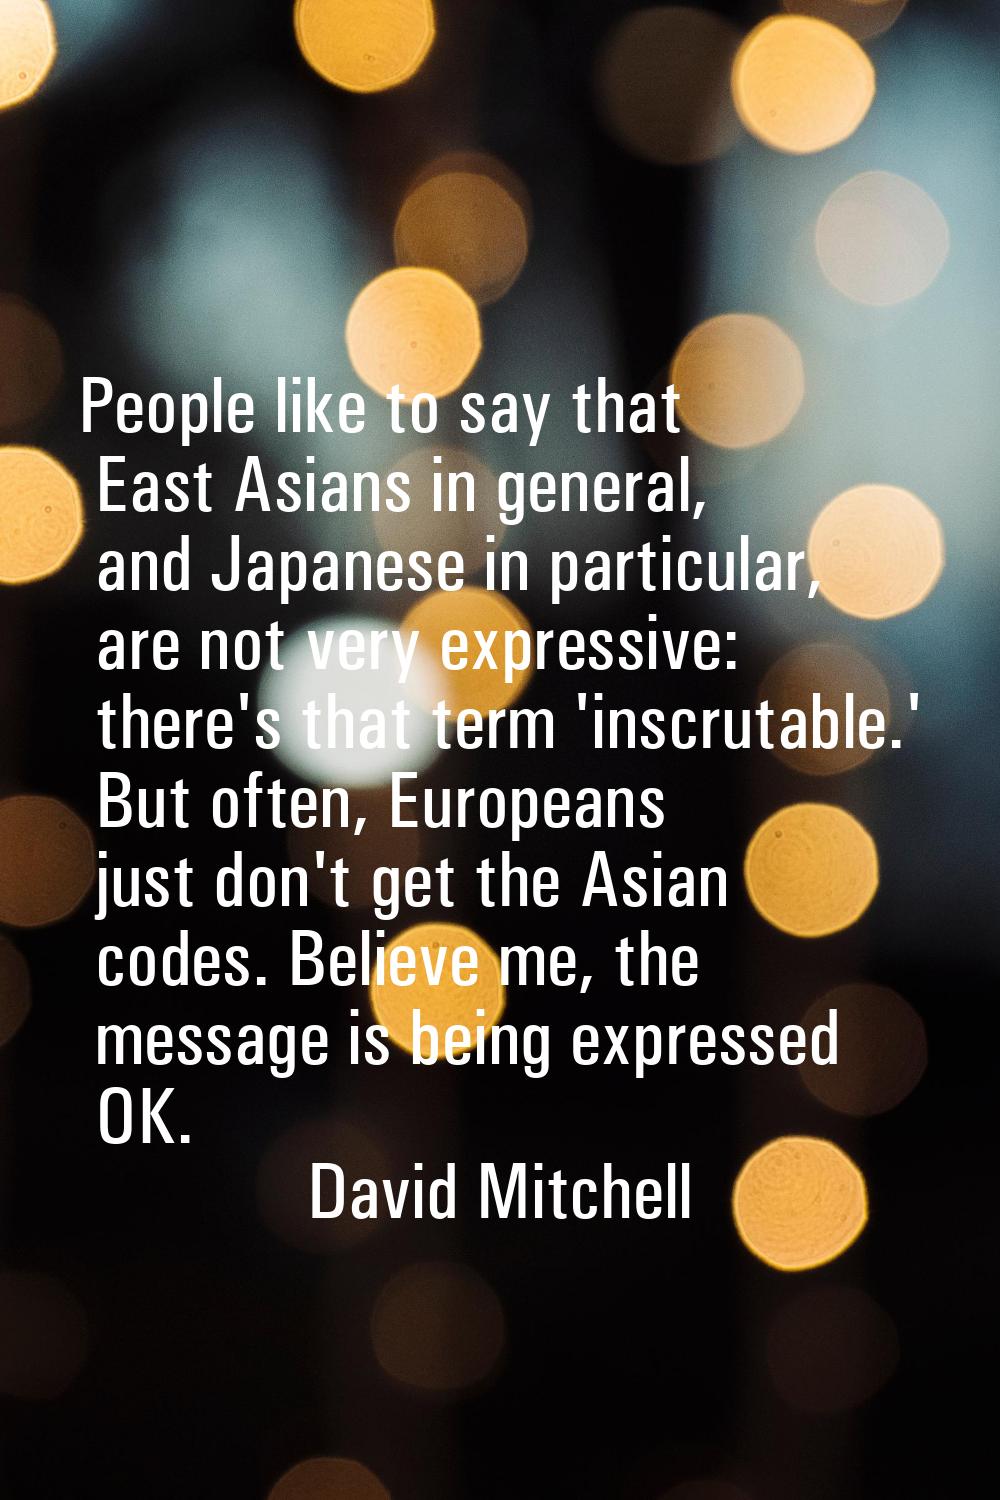 People like to say that East Asians in general, and Japanese in particular, are not very expressive